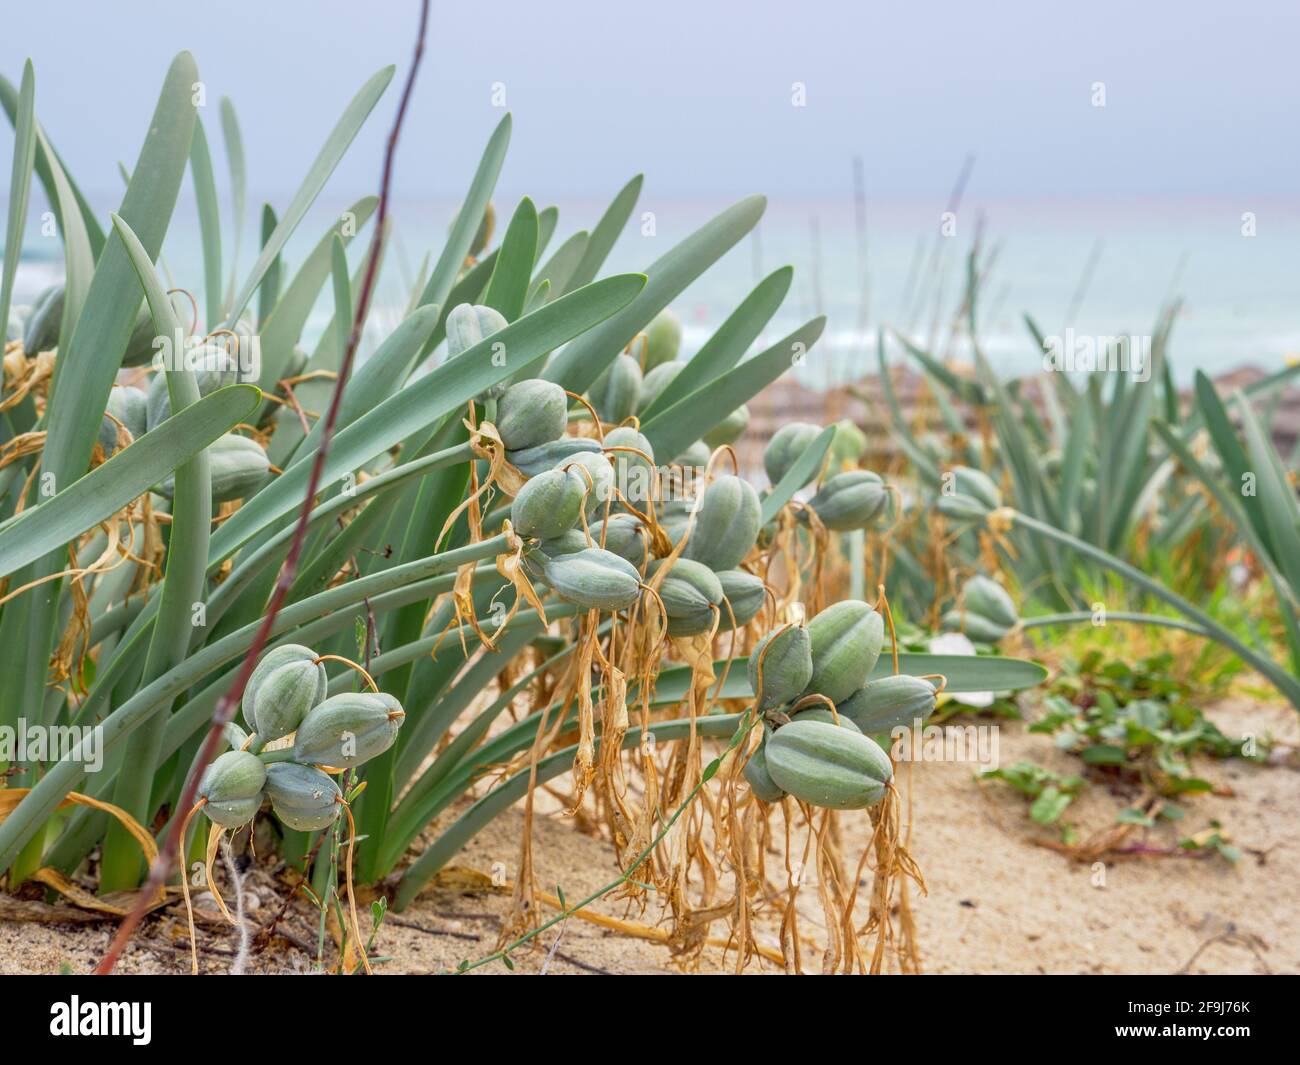 Bulbous perennial evergreen plant sea daffodil (Pancratium maritimum) with a long neck and glaucous linear leaves growing on Nissi beach near sea. Stock Photo